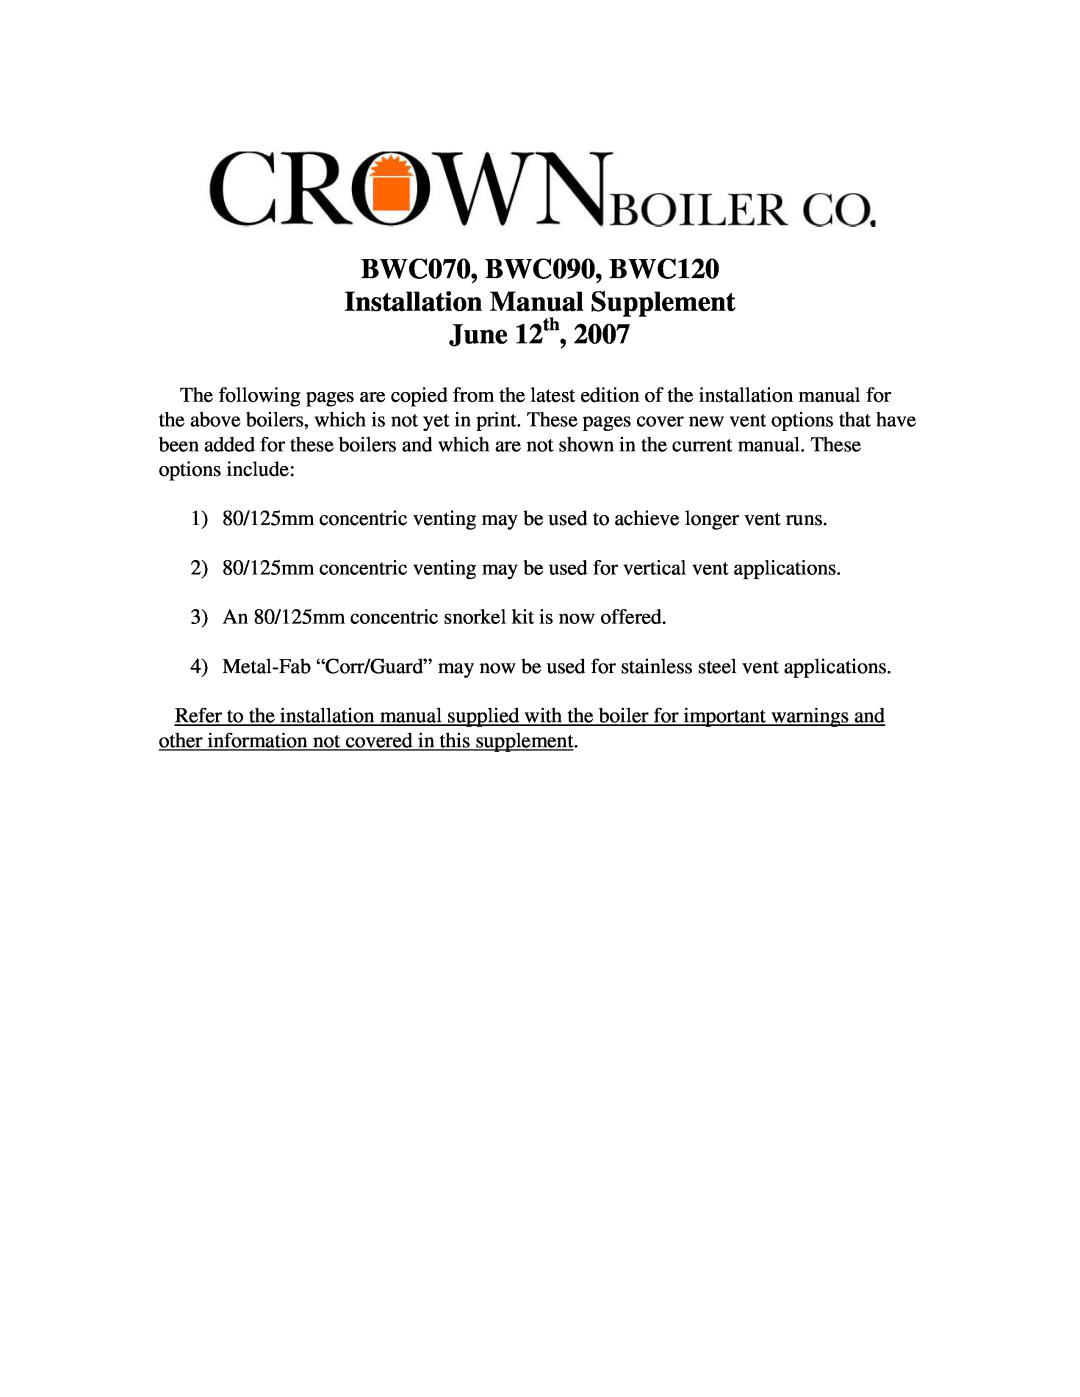 Crown Boiler installation manual BWC070, BWC090, BWC120 Installation Manual Supplement June 12th 